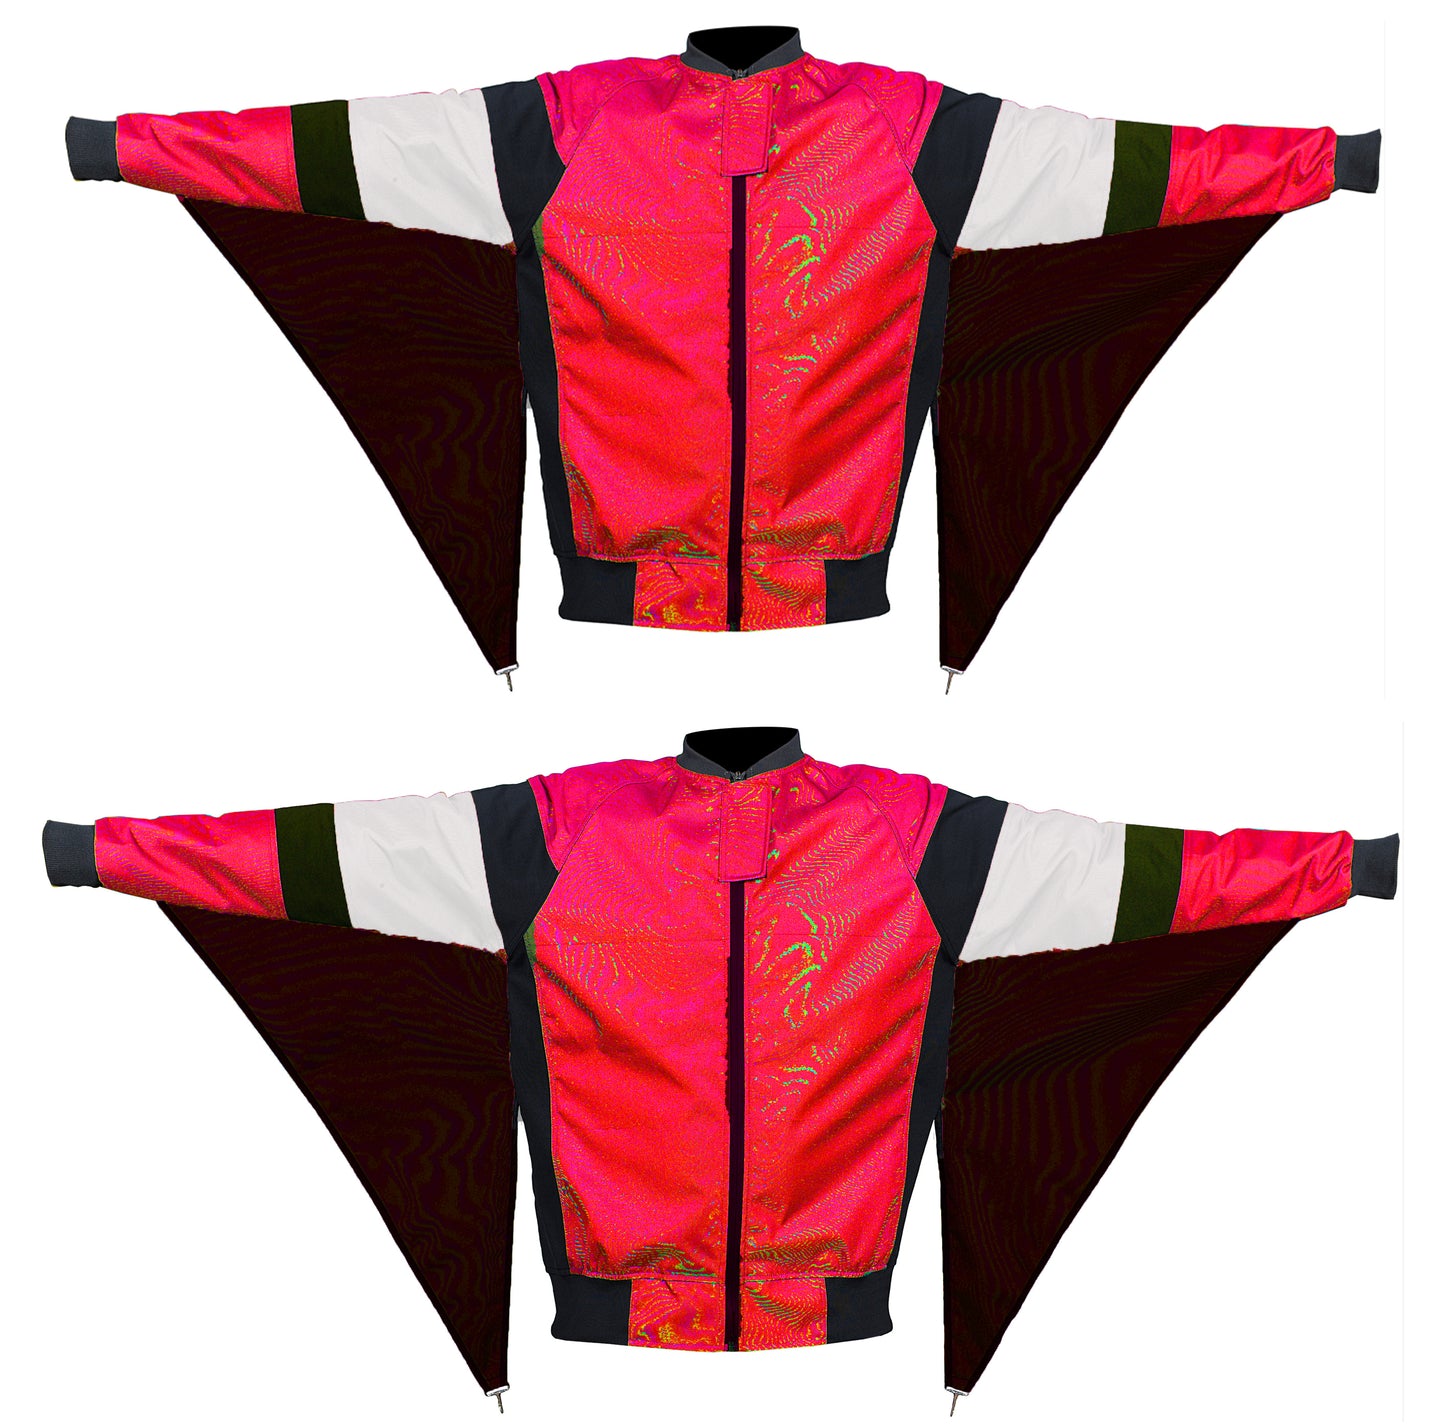 Unique colors Skydiving Camera jacket nd-040